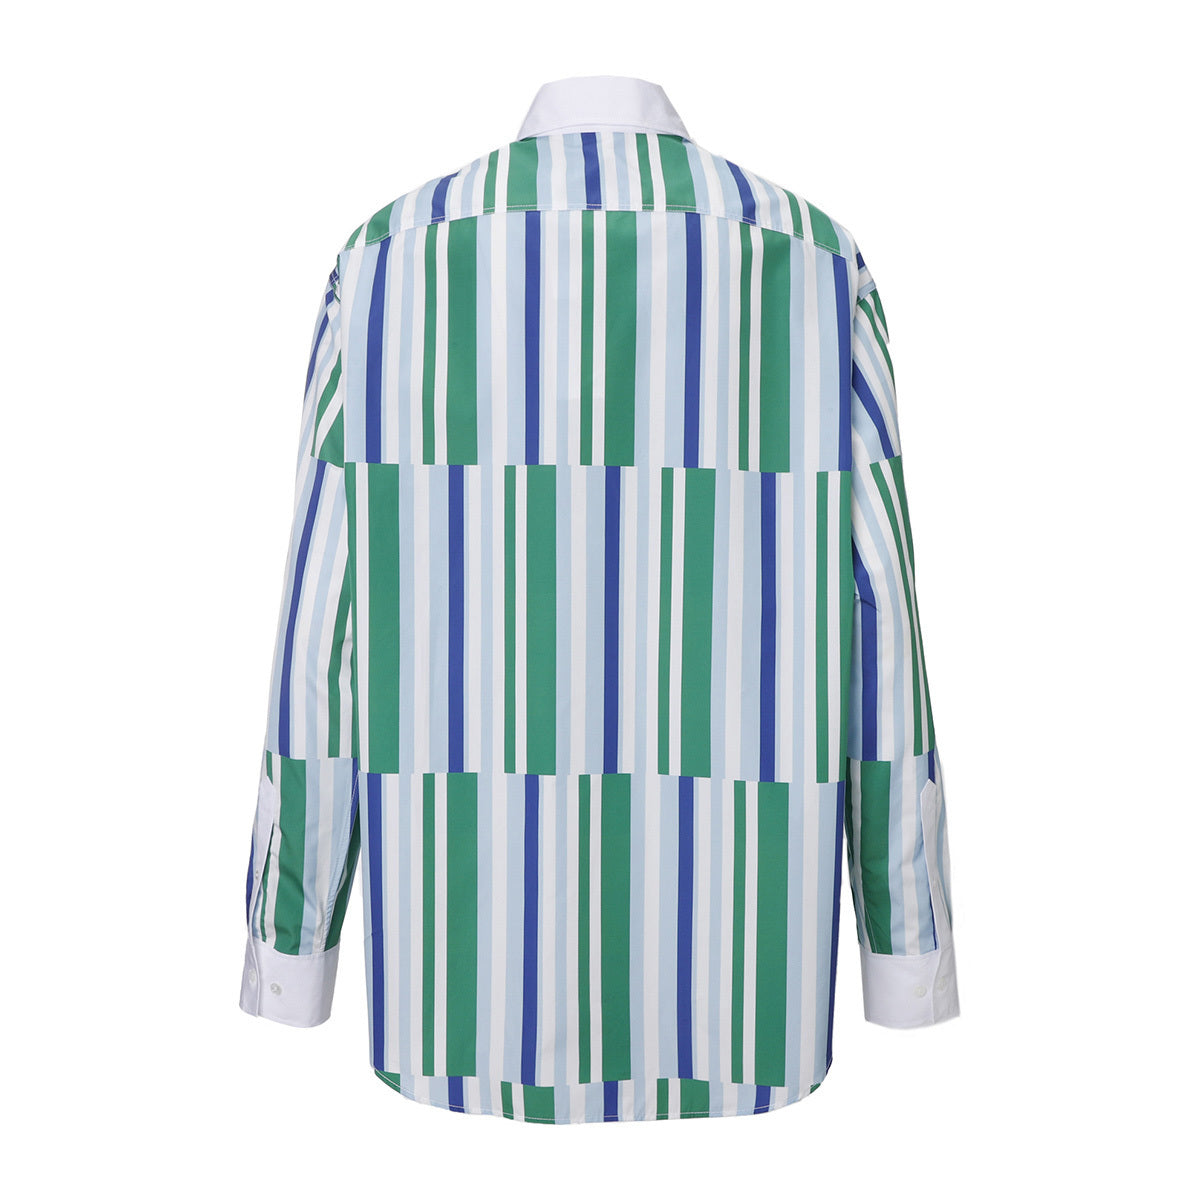 Relaxed Straggered Stripes Shirt